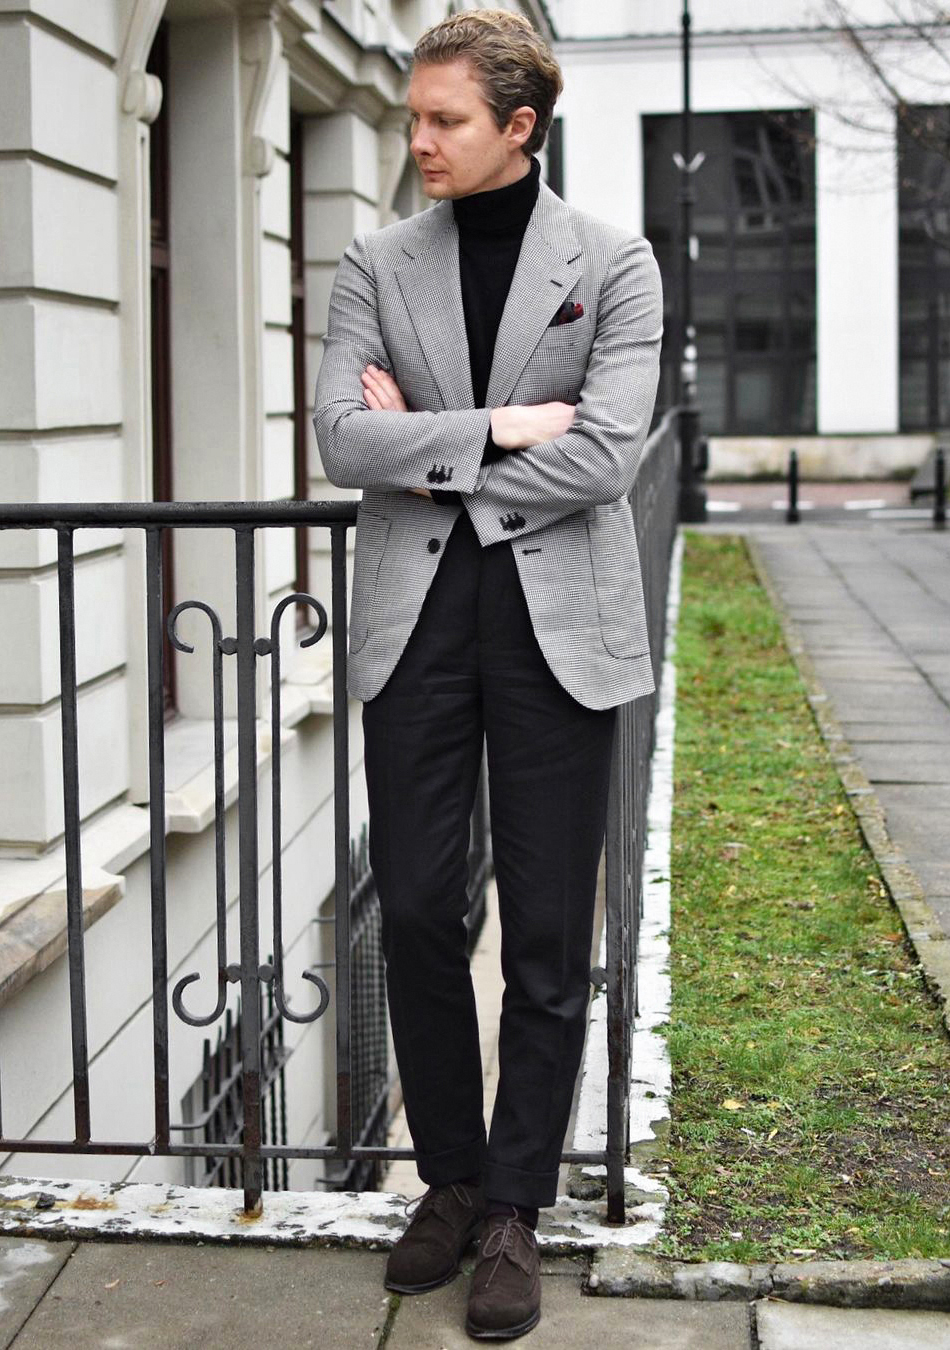 Best Blazer and Pants Color Combinations for Men